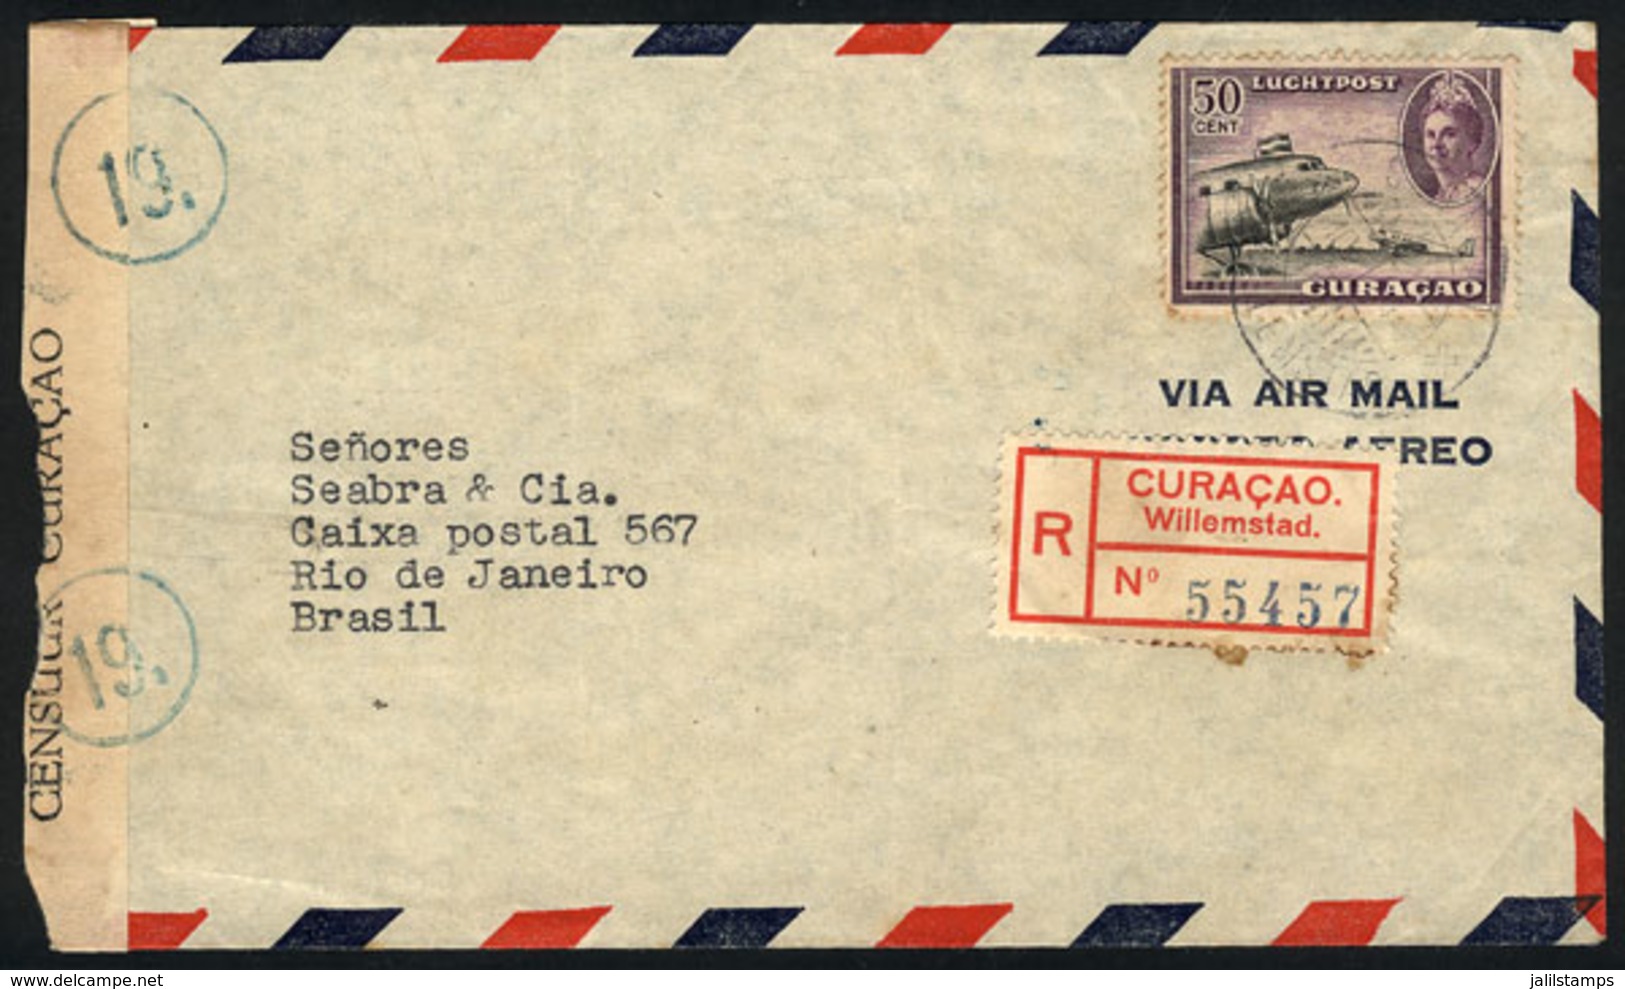 CURACAO: Registered Airmail Cover Sent From Willemstad To Rio De Janeiro On 10/NO/1944 Franked With 50c. And Interesting - Curaçao, Antilles Neérlandaises, Aruba